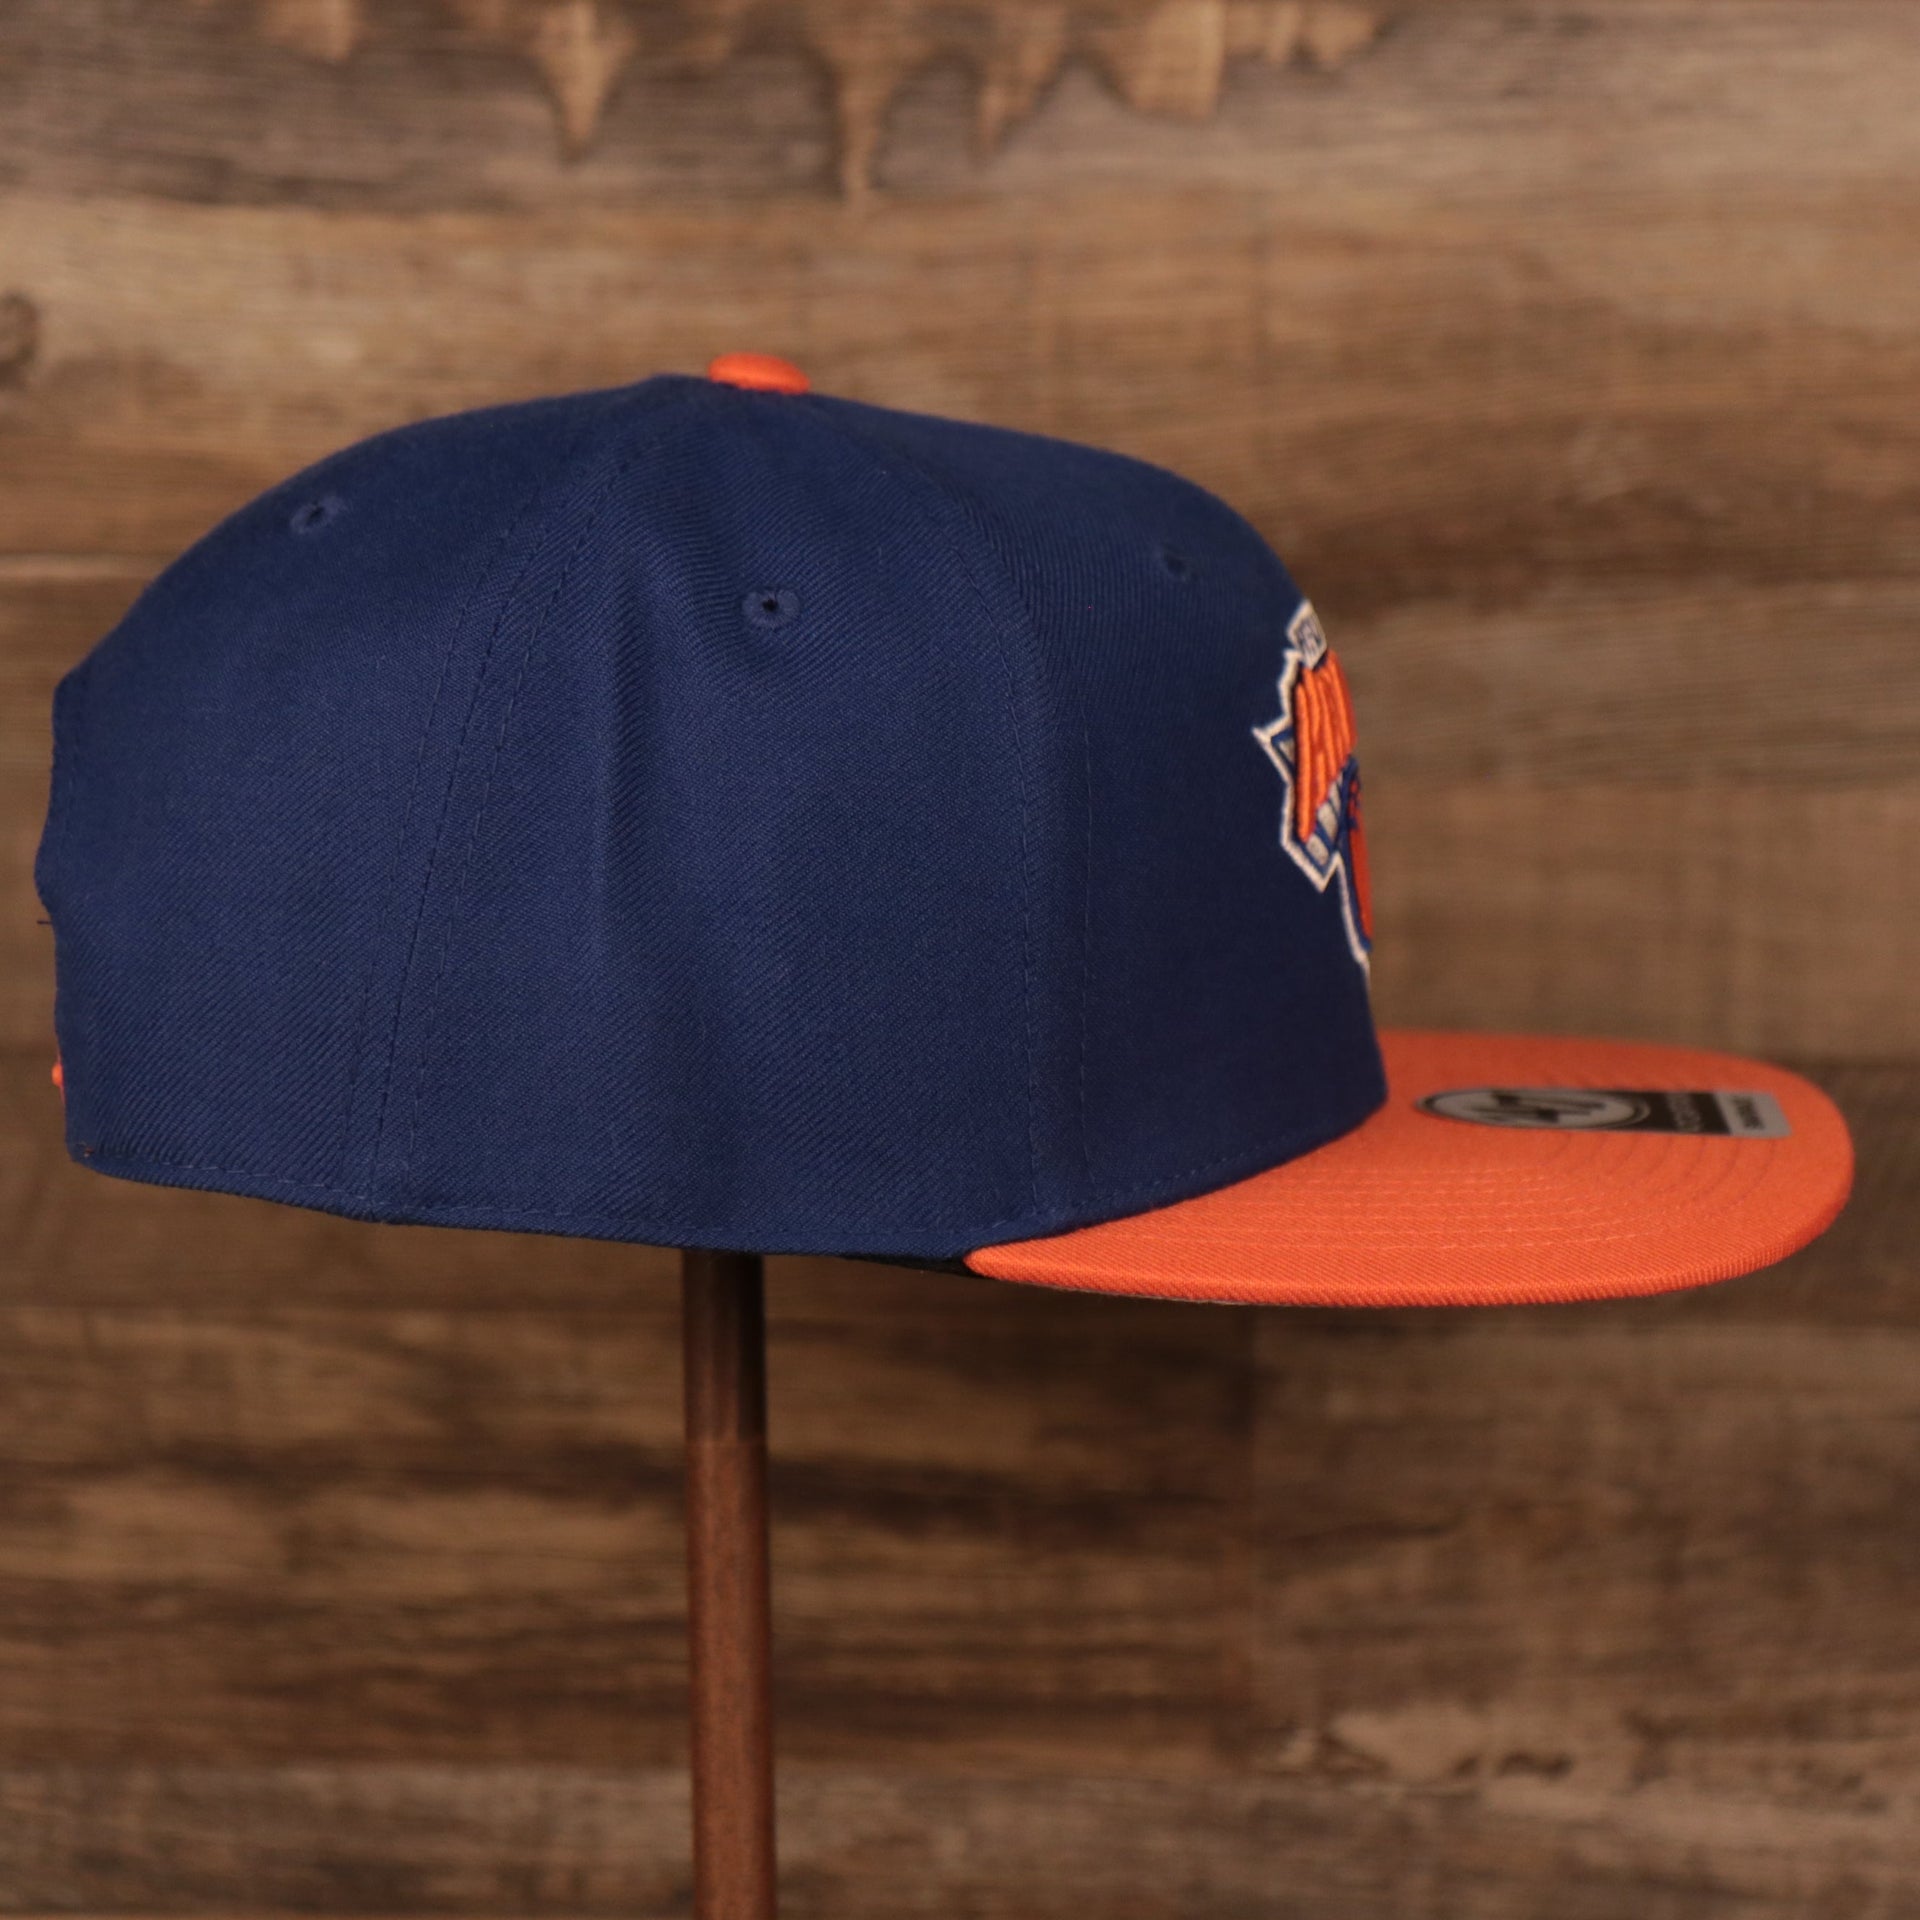 wearers right side of the New York Knicks Royal Blue and Orange Adjustable Grey Bottom Snapback Hat